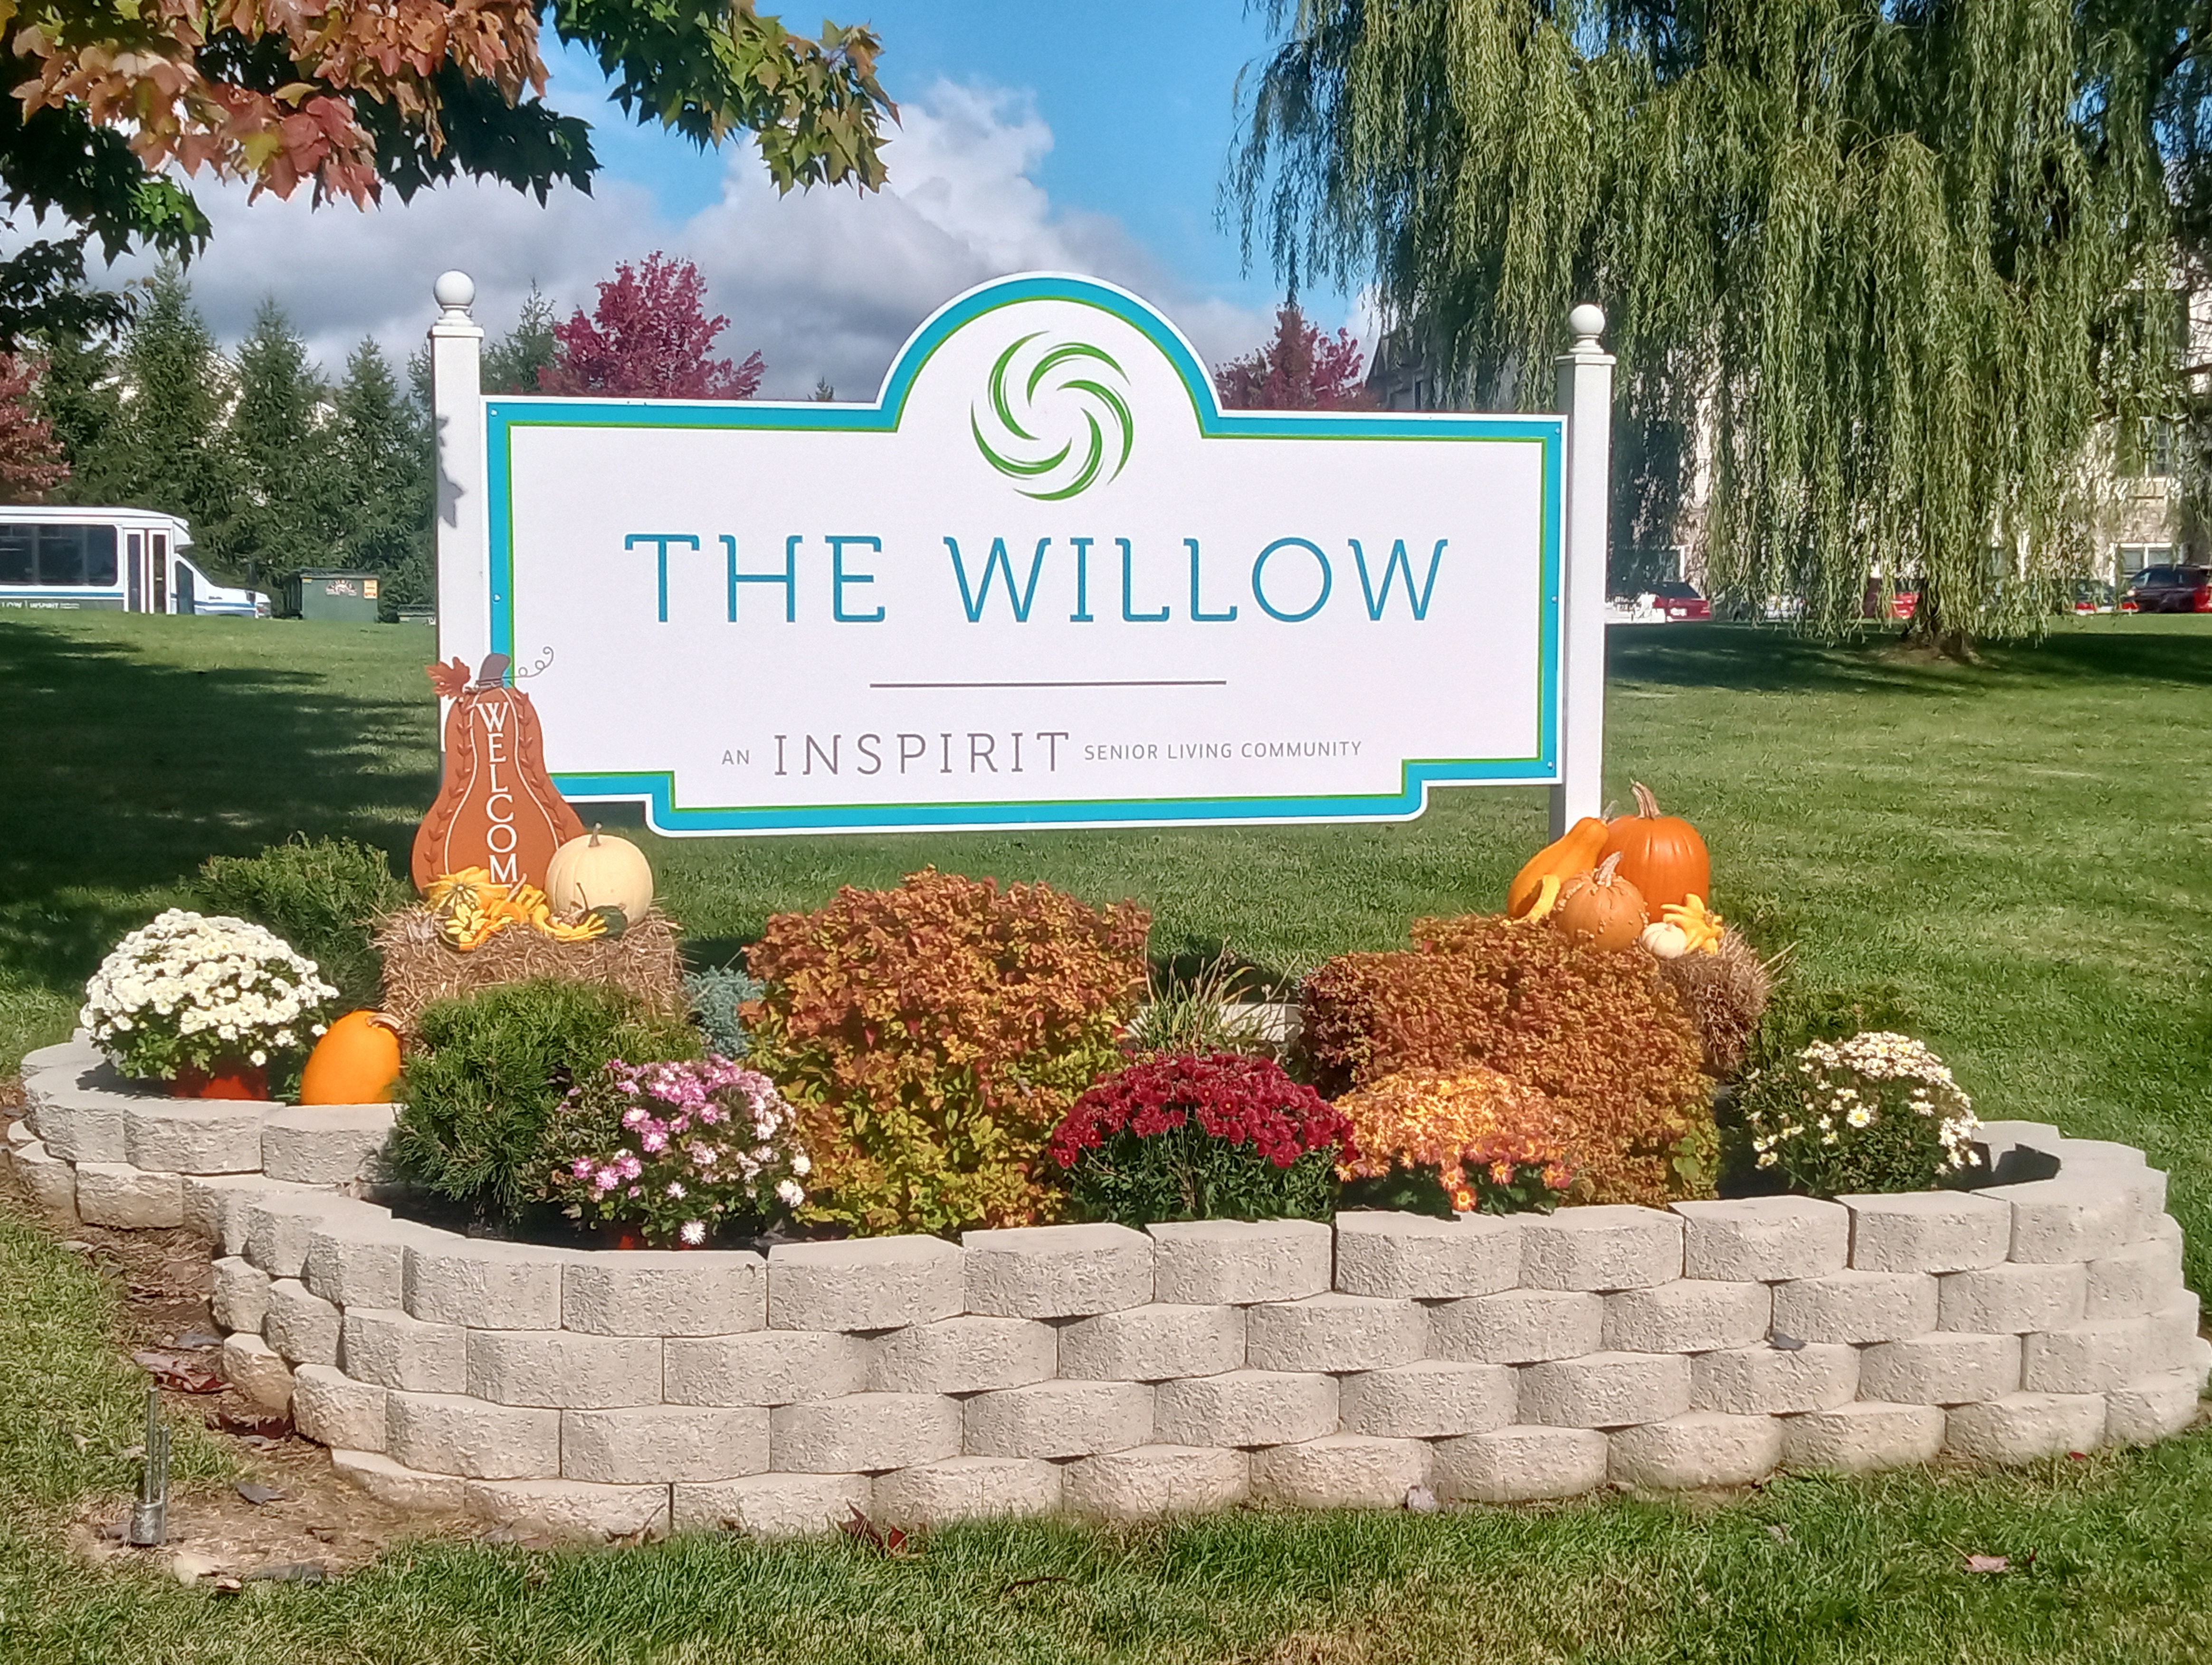 The Willow image